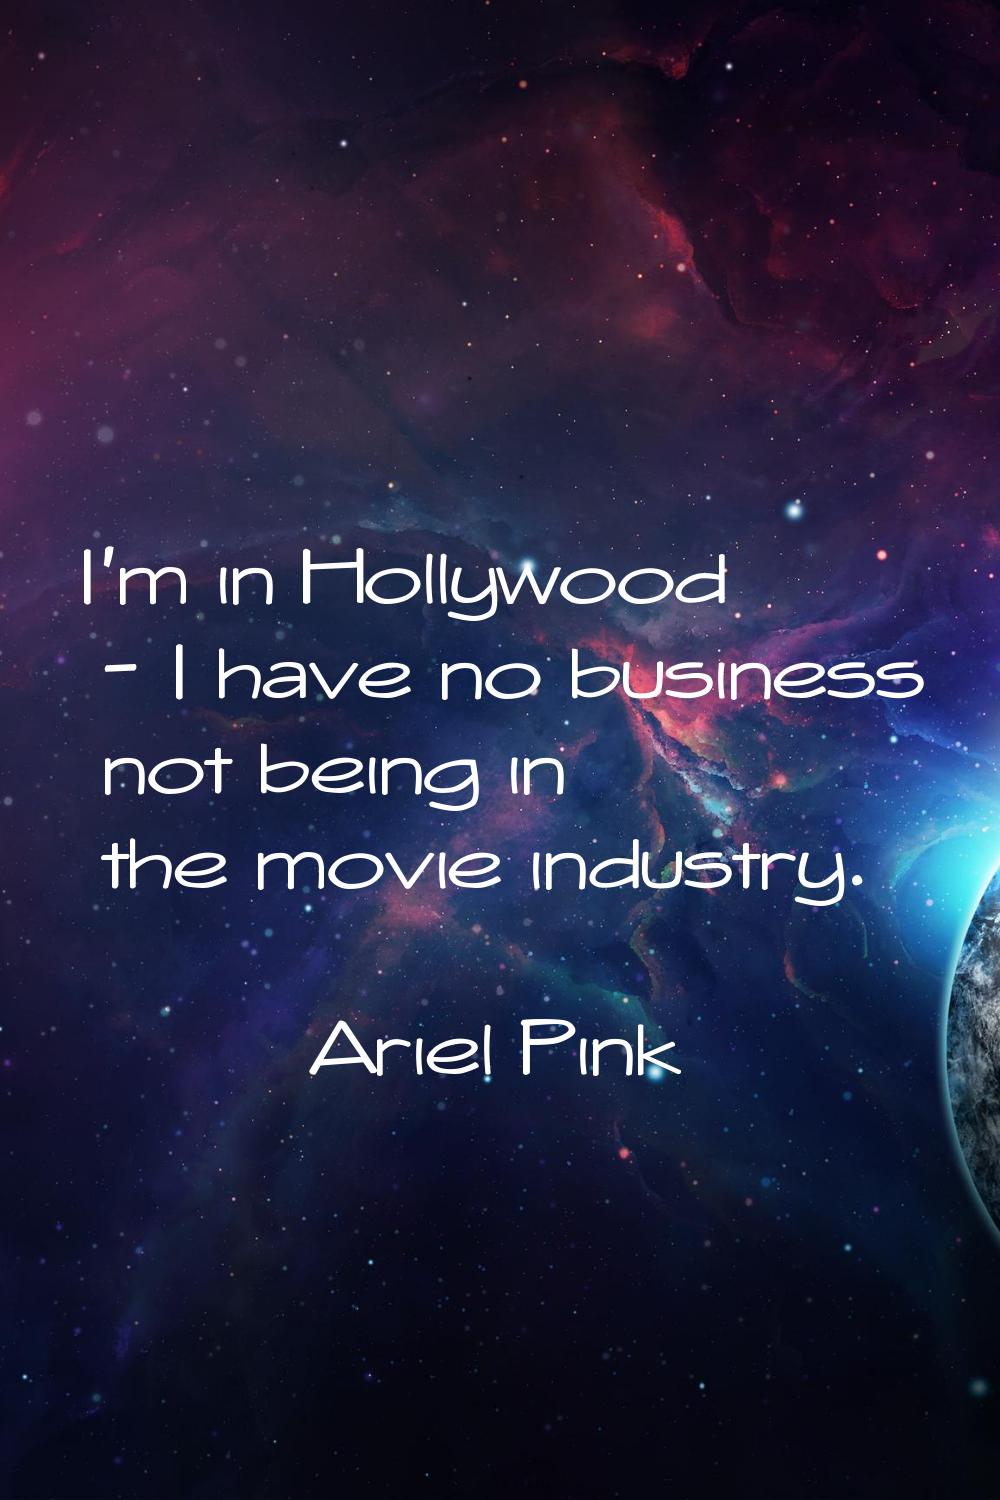 I'm in Hollywood - I have no business not being in the movie industry.